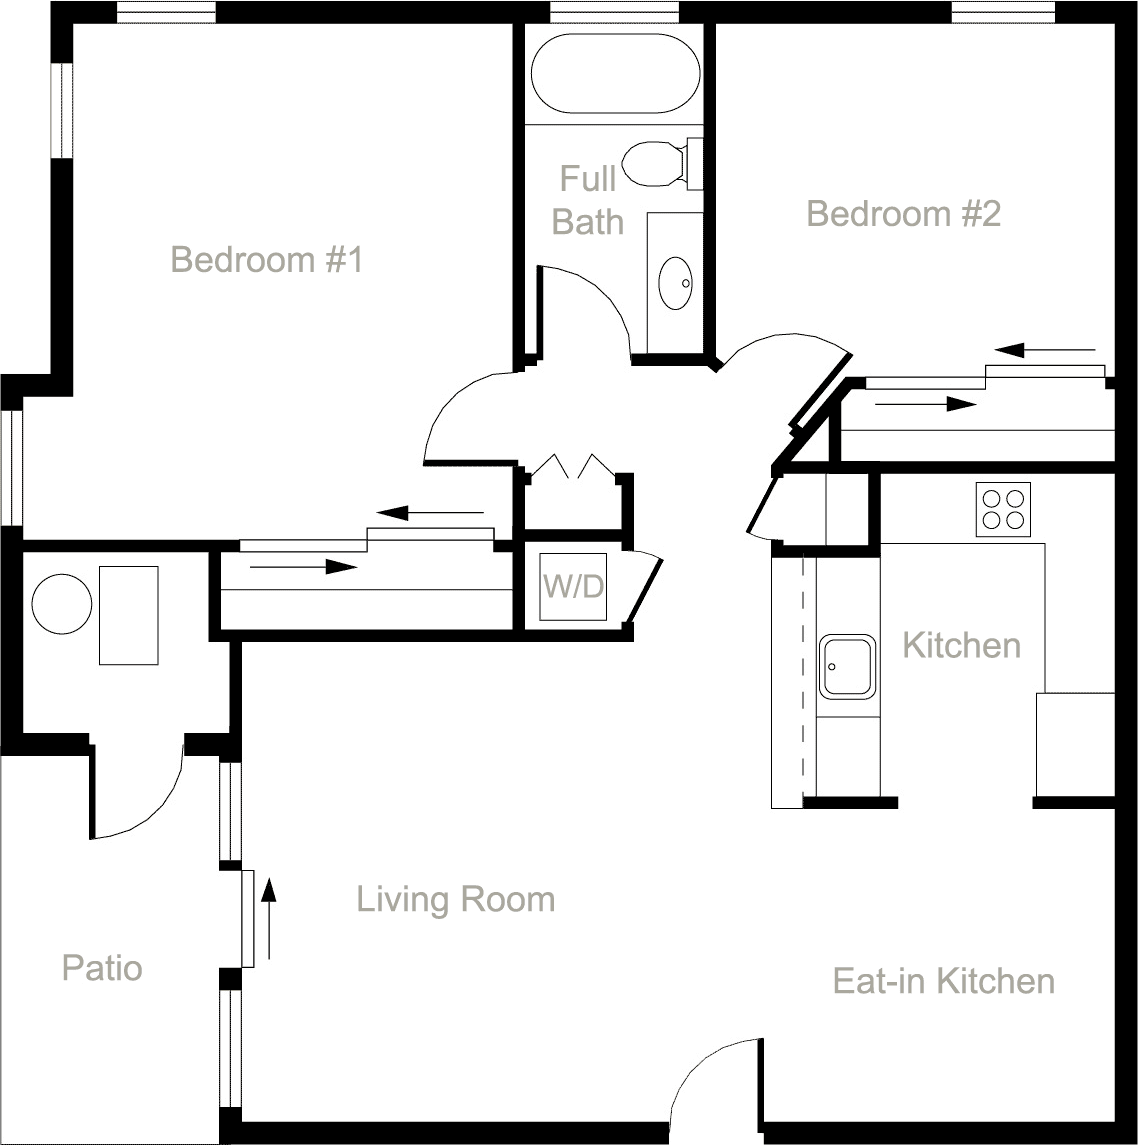 1st Floor Plan - The Excellor I (Lower)